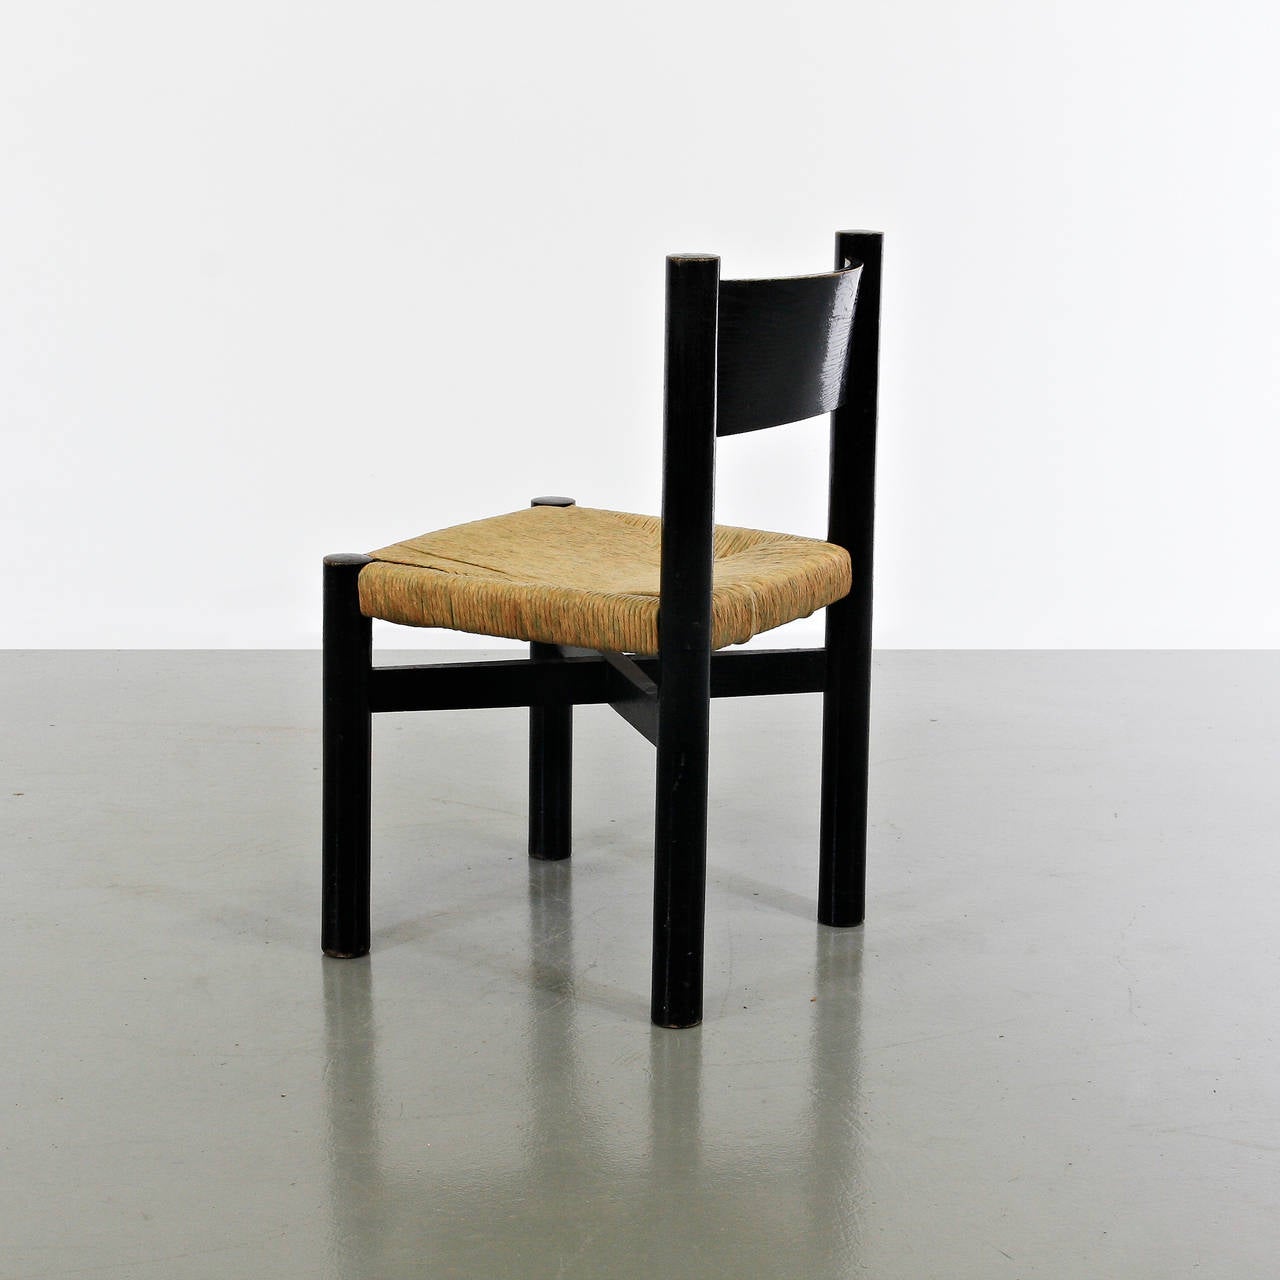 Dinning chair, model Meribel, designed by Charlotte Perriand, circa 1950.
Manufactured by Georges Blanchon (France)
Black lacquered wood base and legs, and original rush seat.

In good original condition, with minor wear consistent with age and